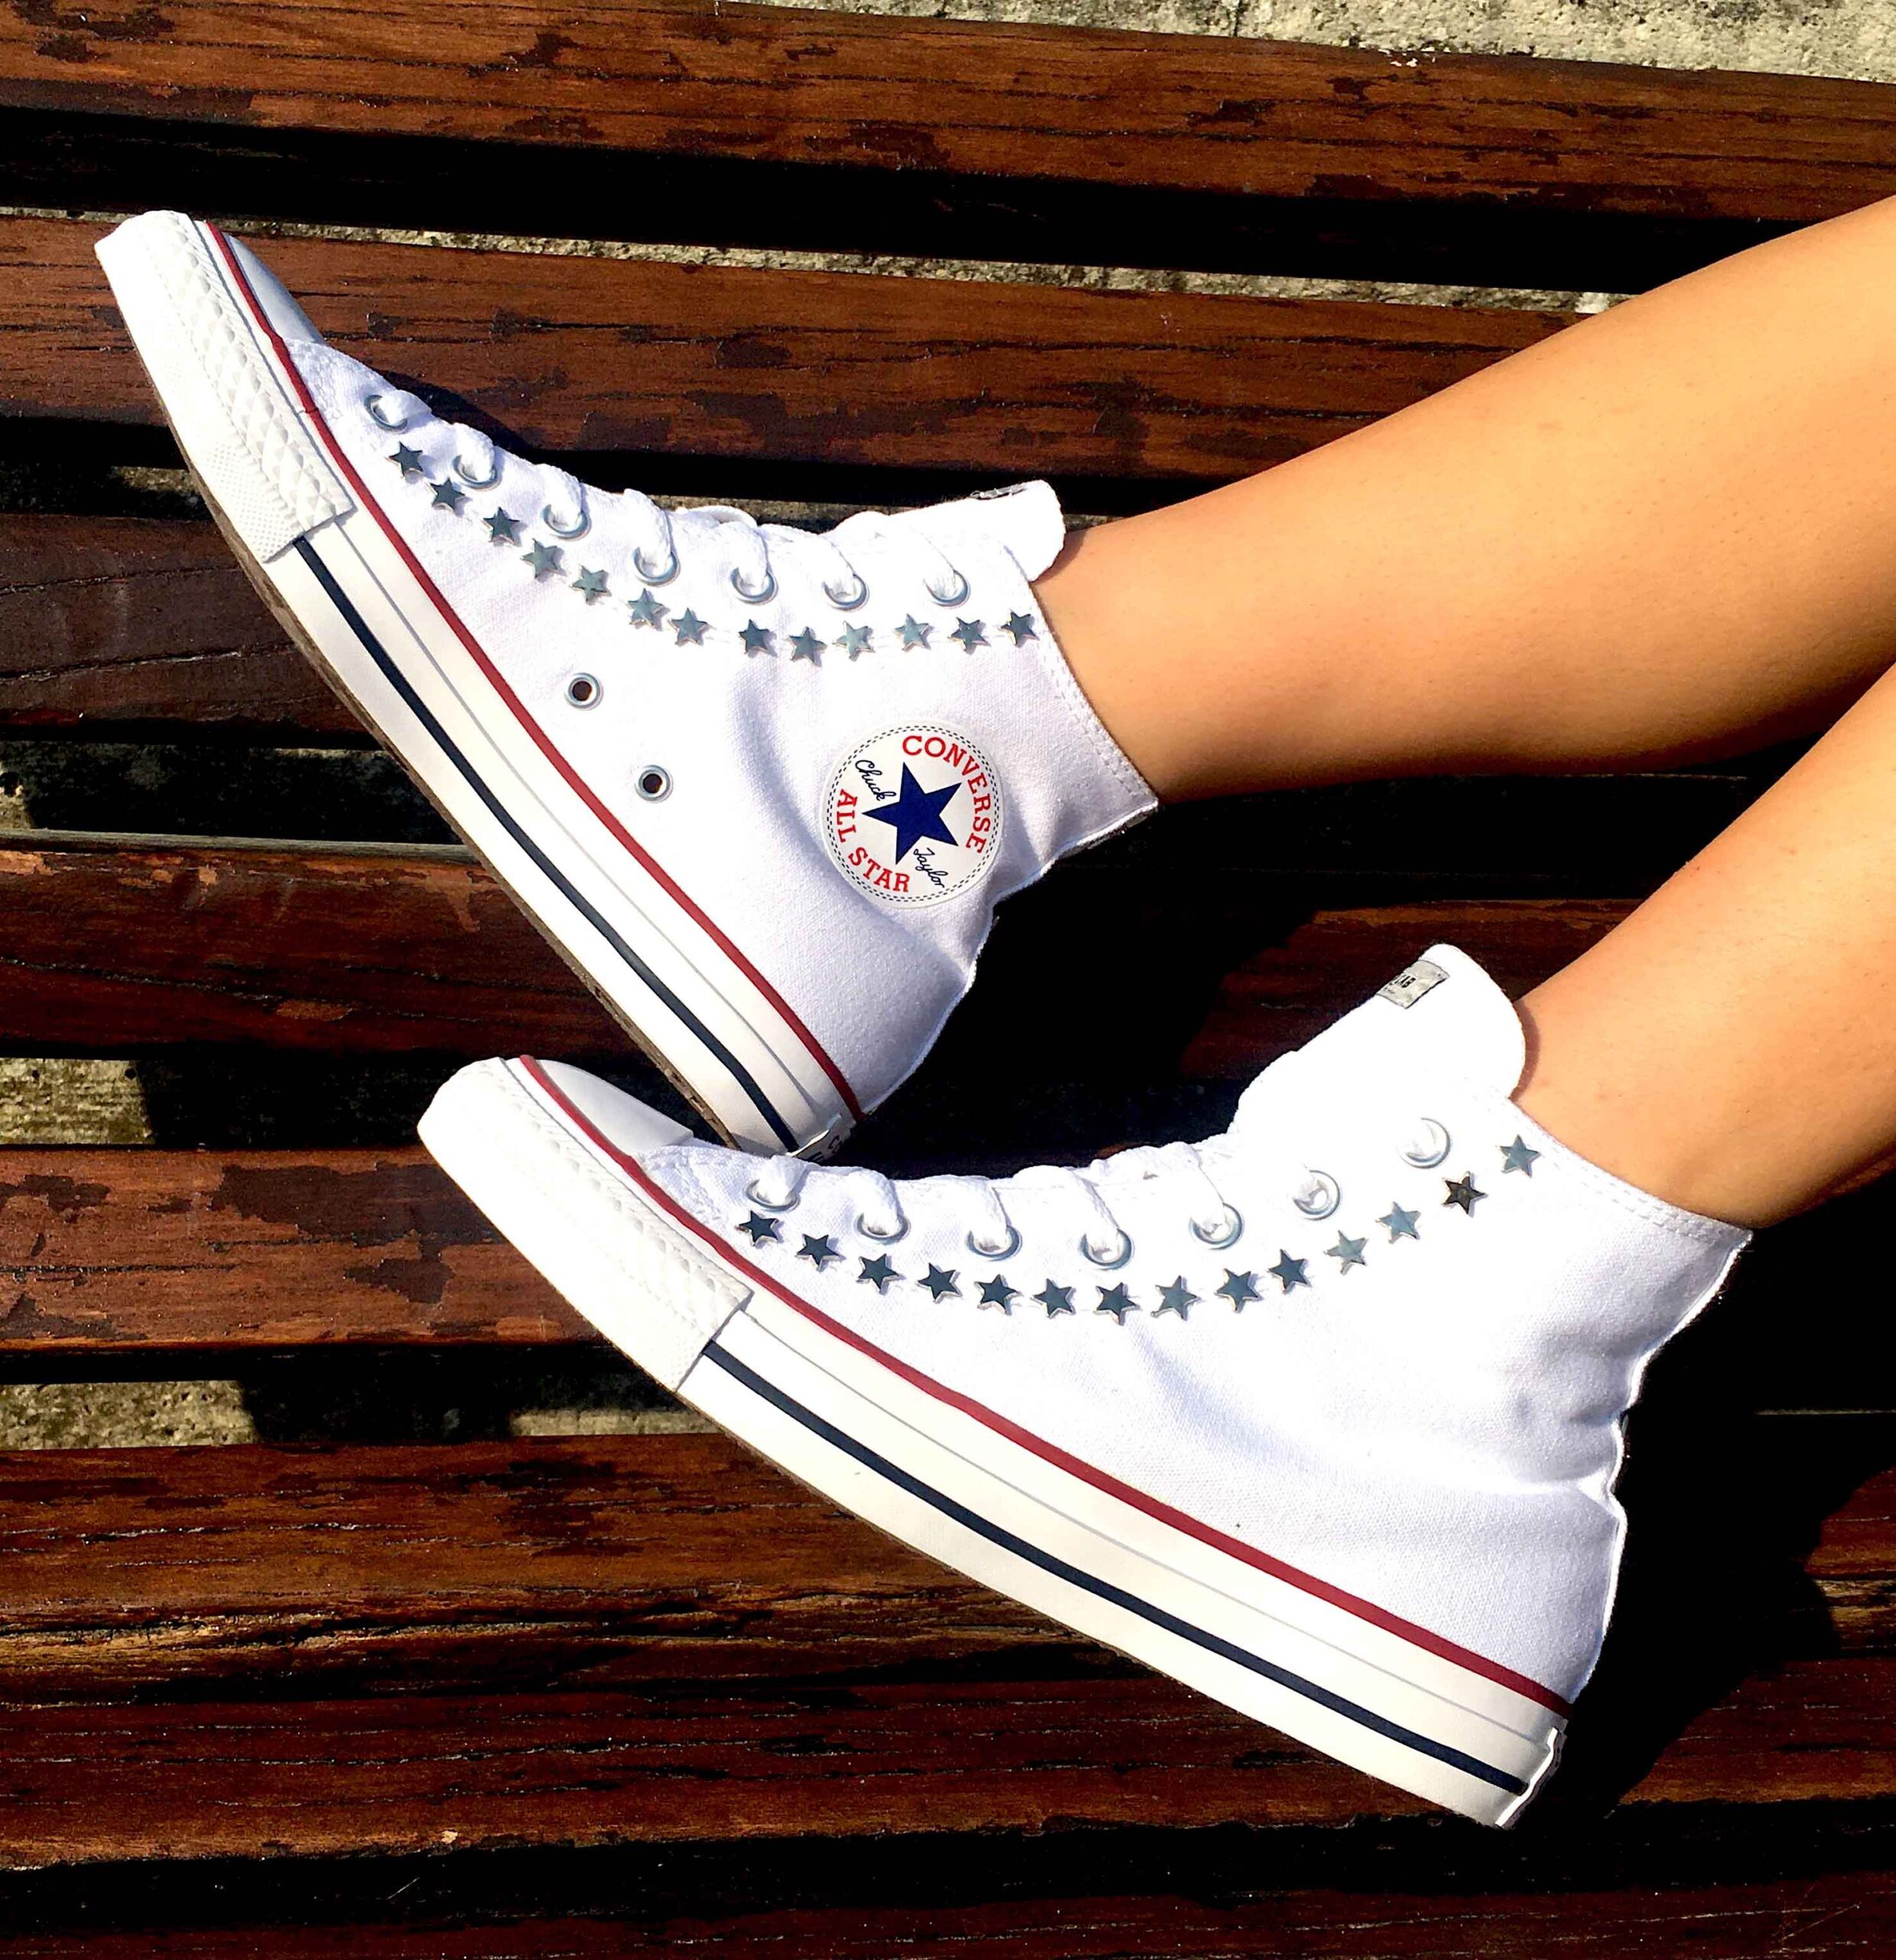 Converse All Star Personalizzate Bianca & Stelle نظافة الشعر